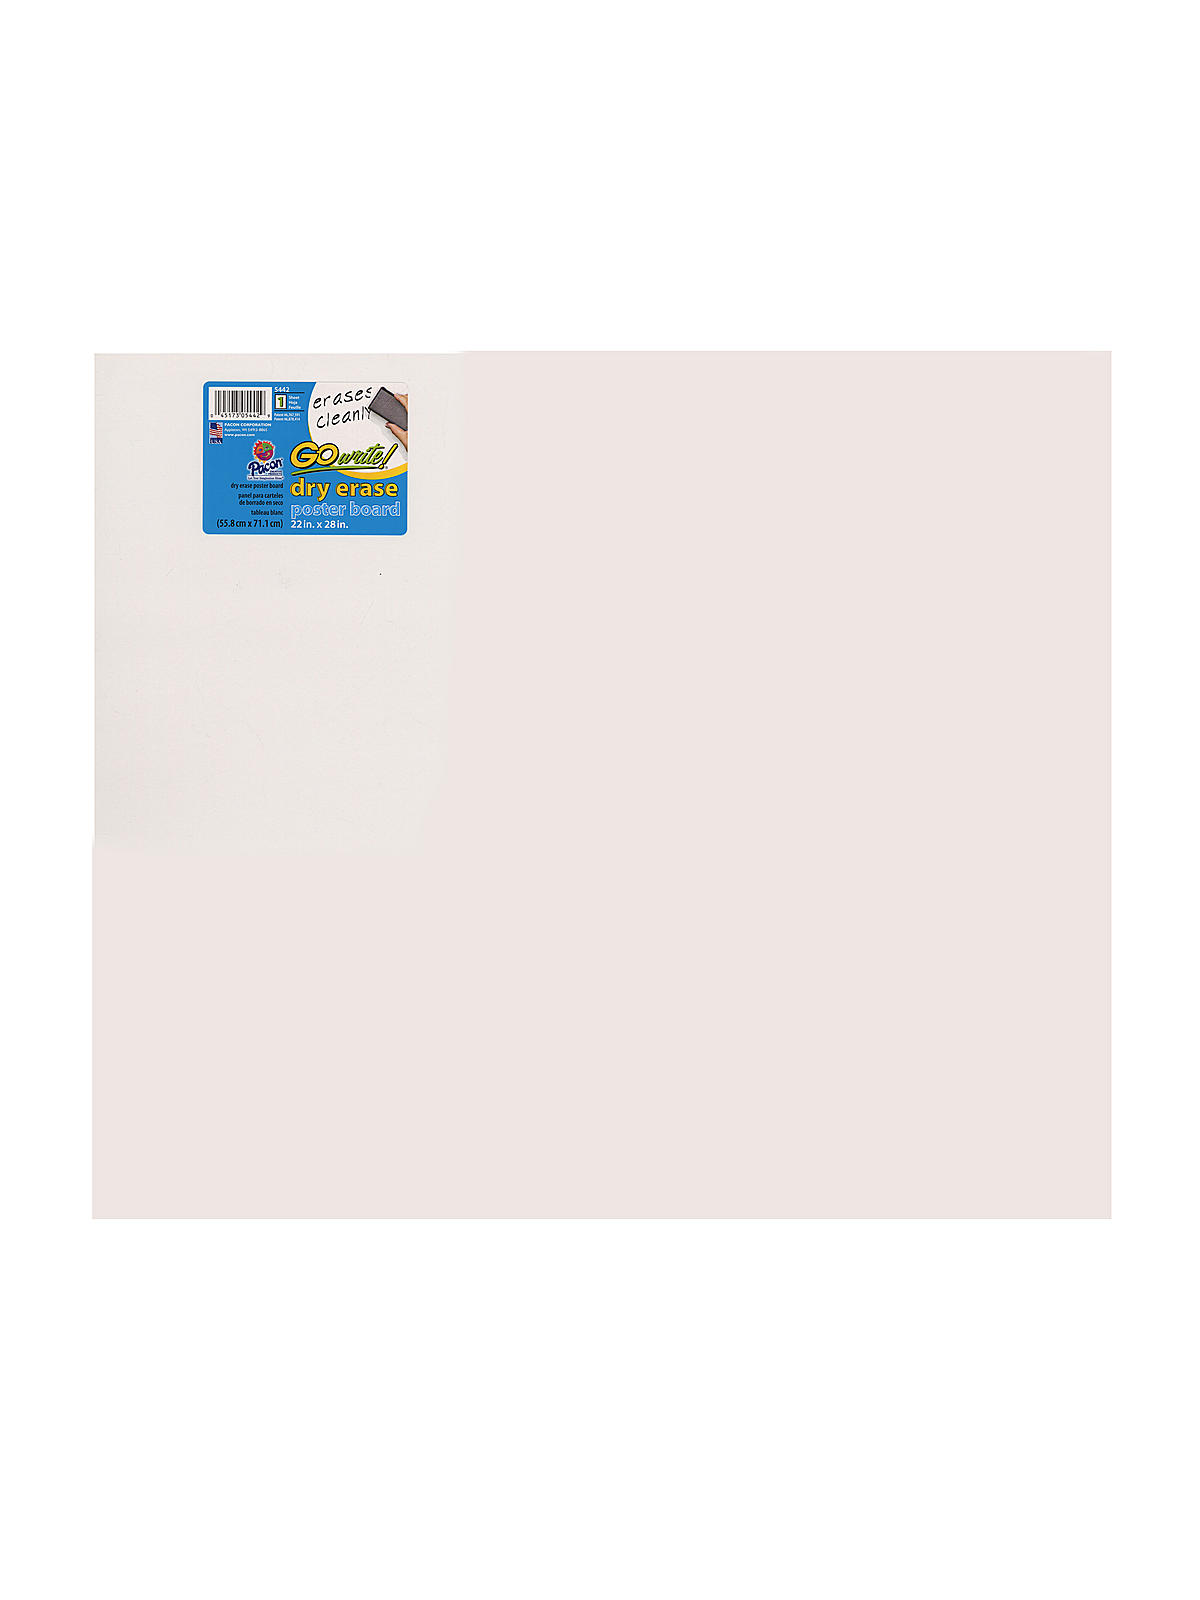 Gowrite Dry Erase Poster Board 22 In. X 28 In.